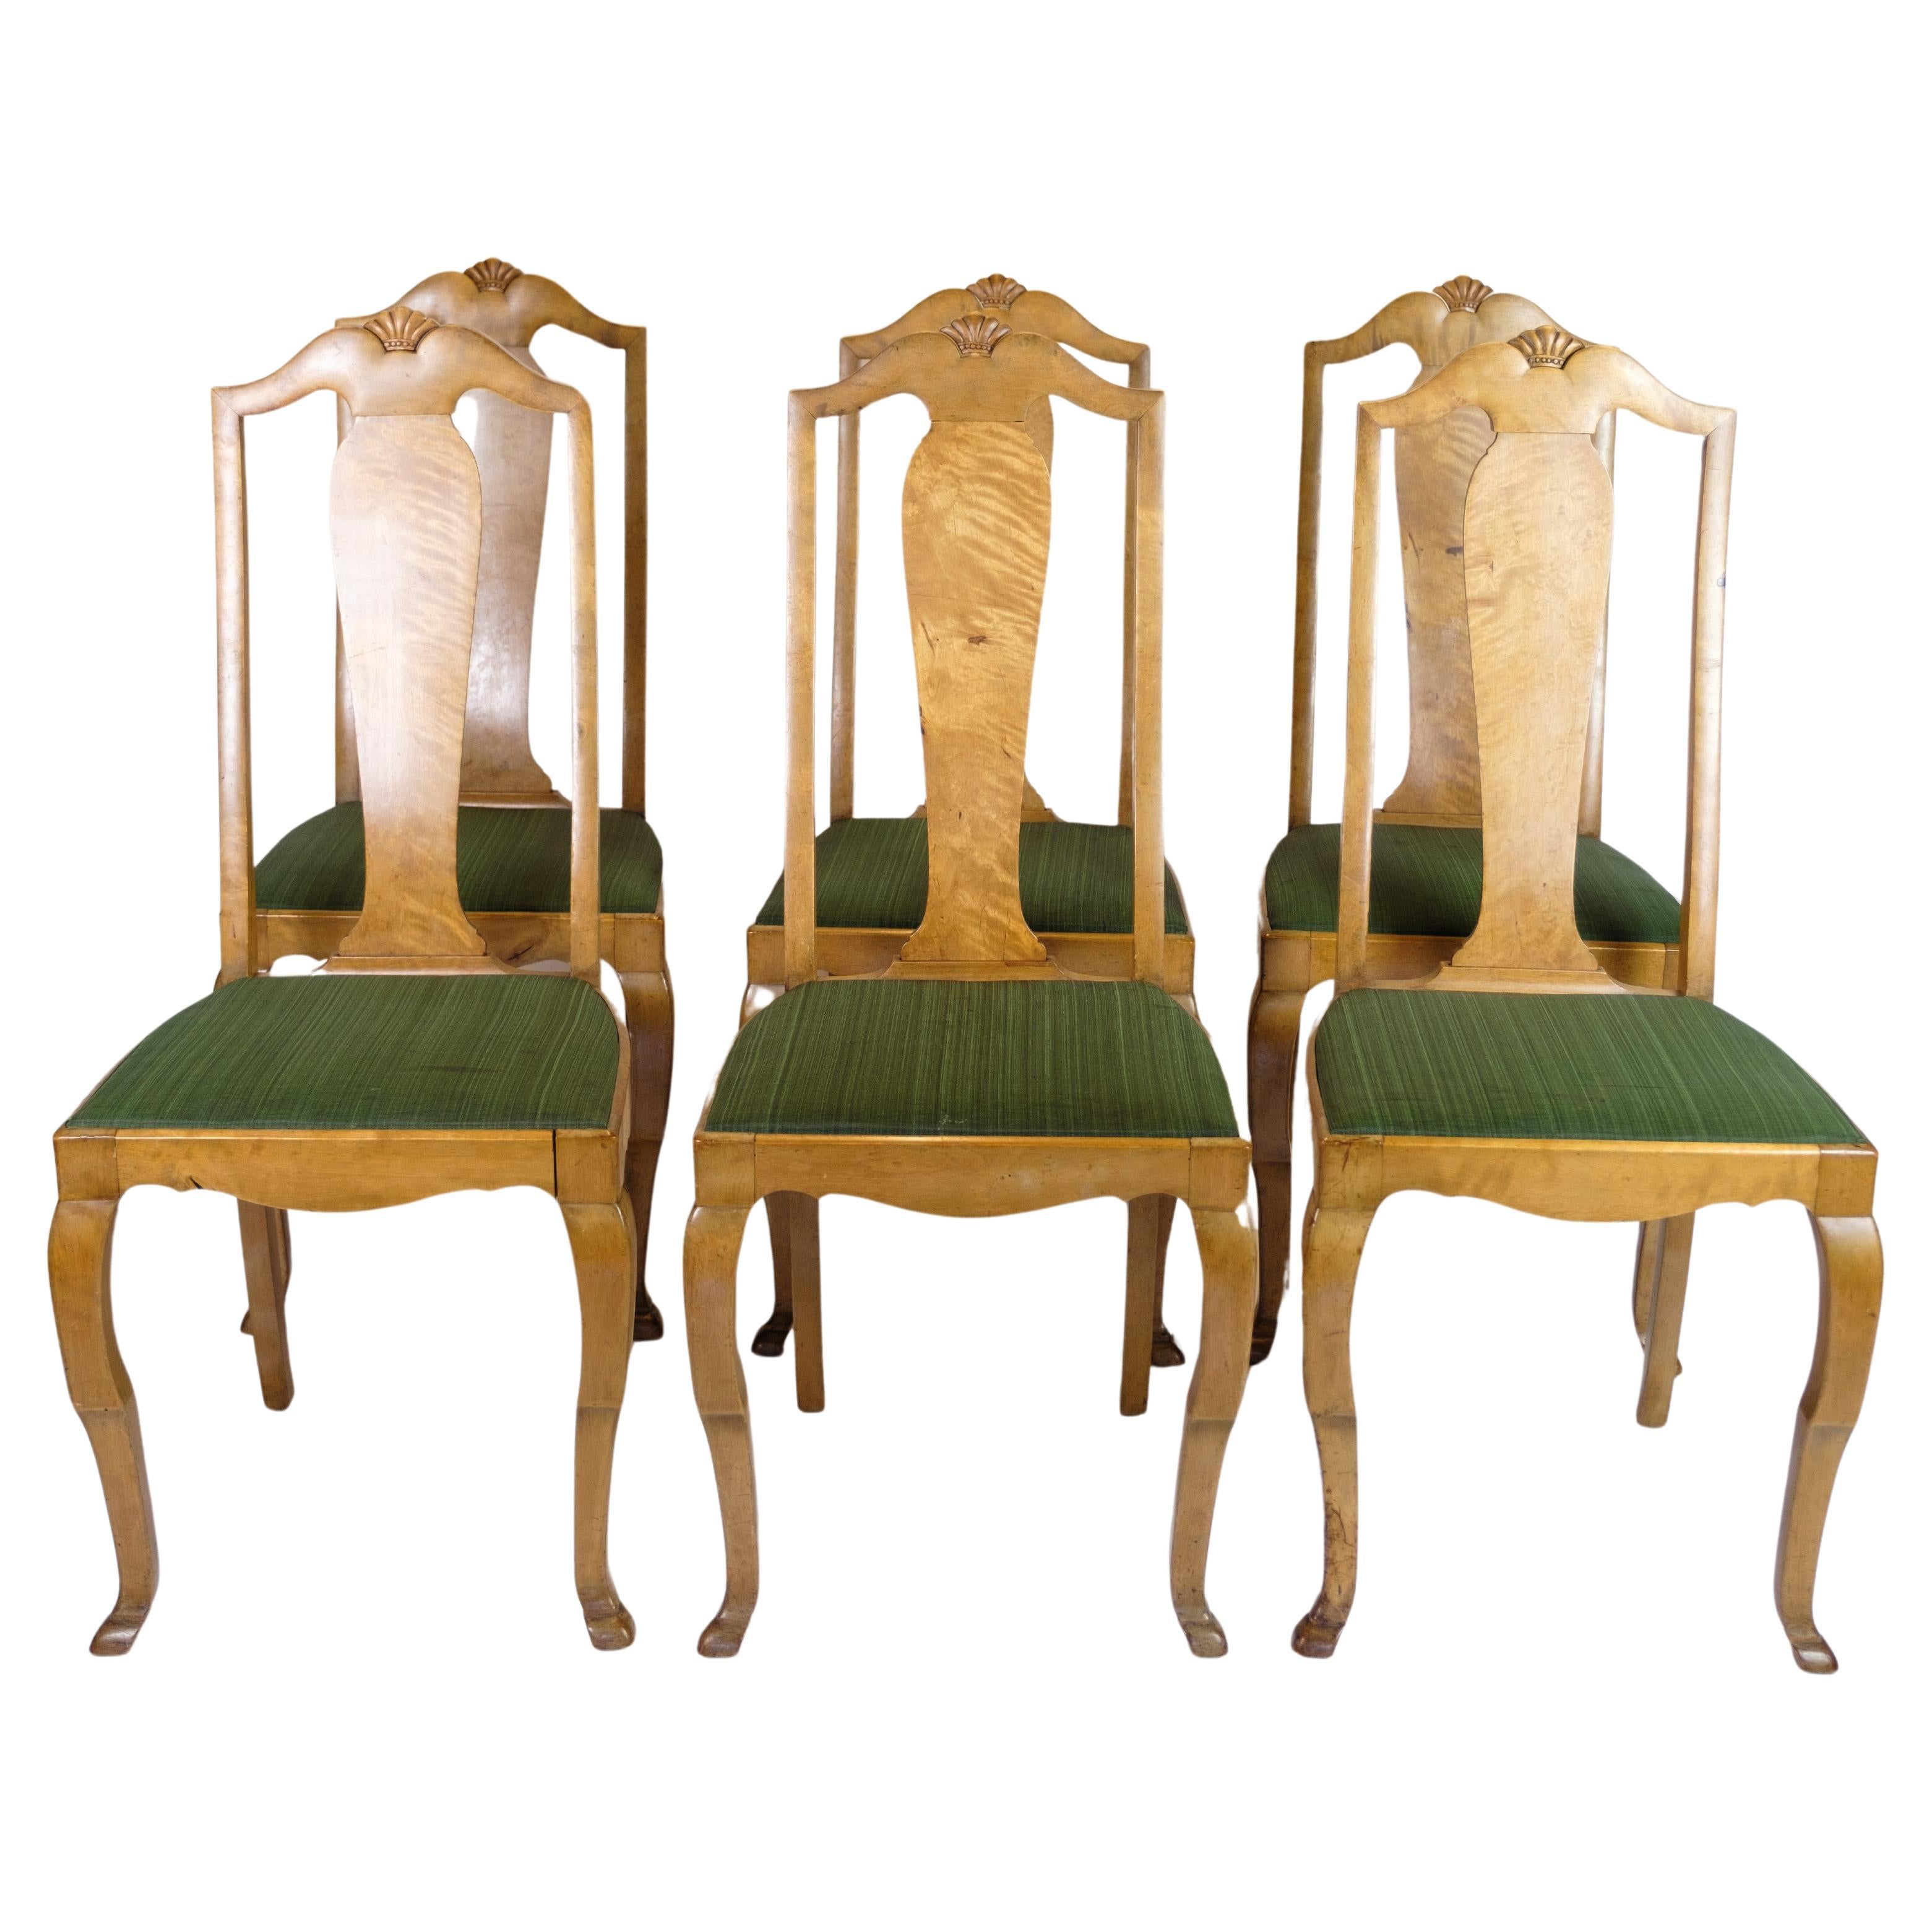 Antique dining room chairs in light birch wood with green fabric Rococo 1920